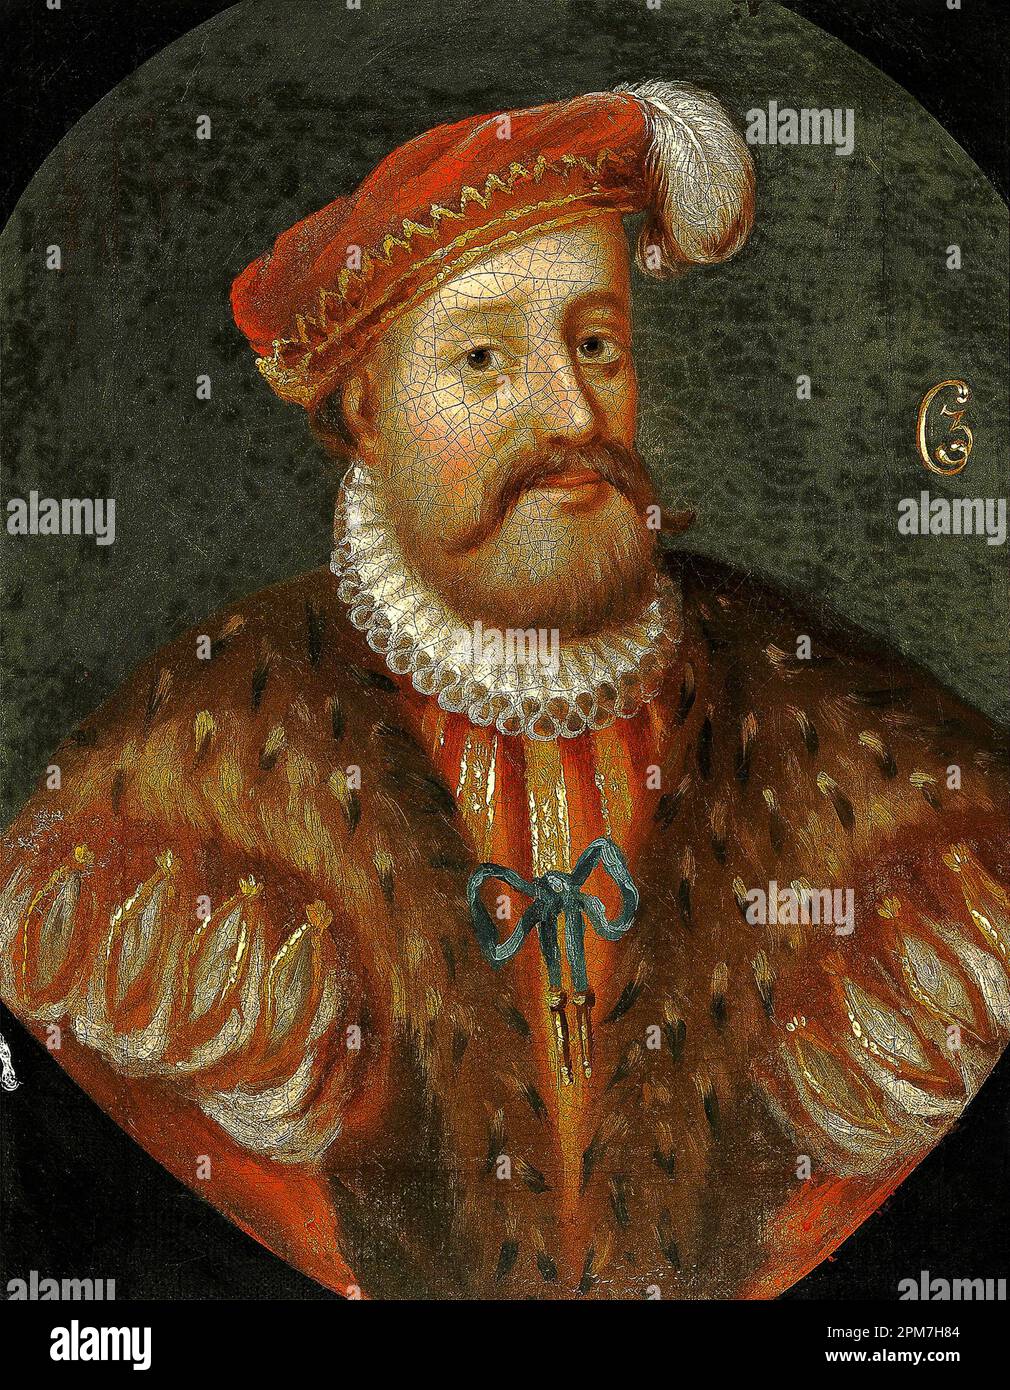 Christian III of Denmark Christian III of Denmark was King of Denmark and Norway from 1534 until his death in 1559. He was the first monarch of the Stock Photo